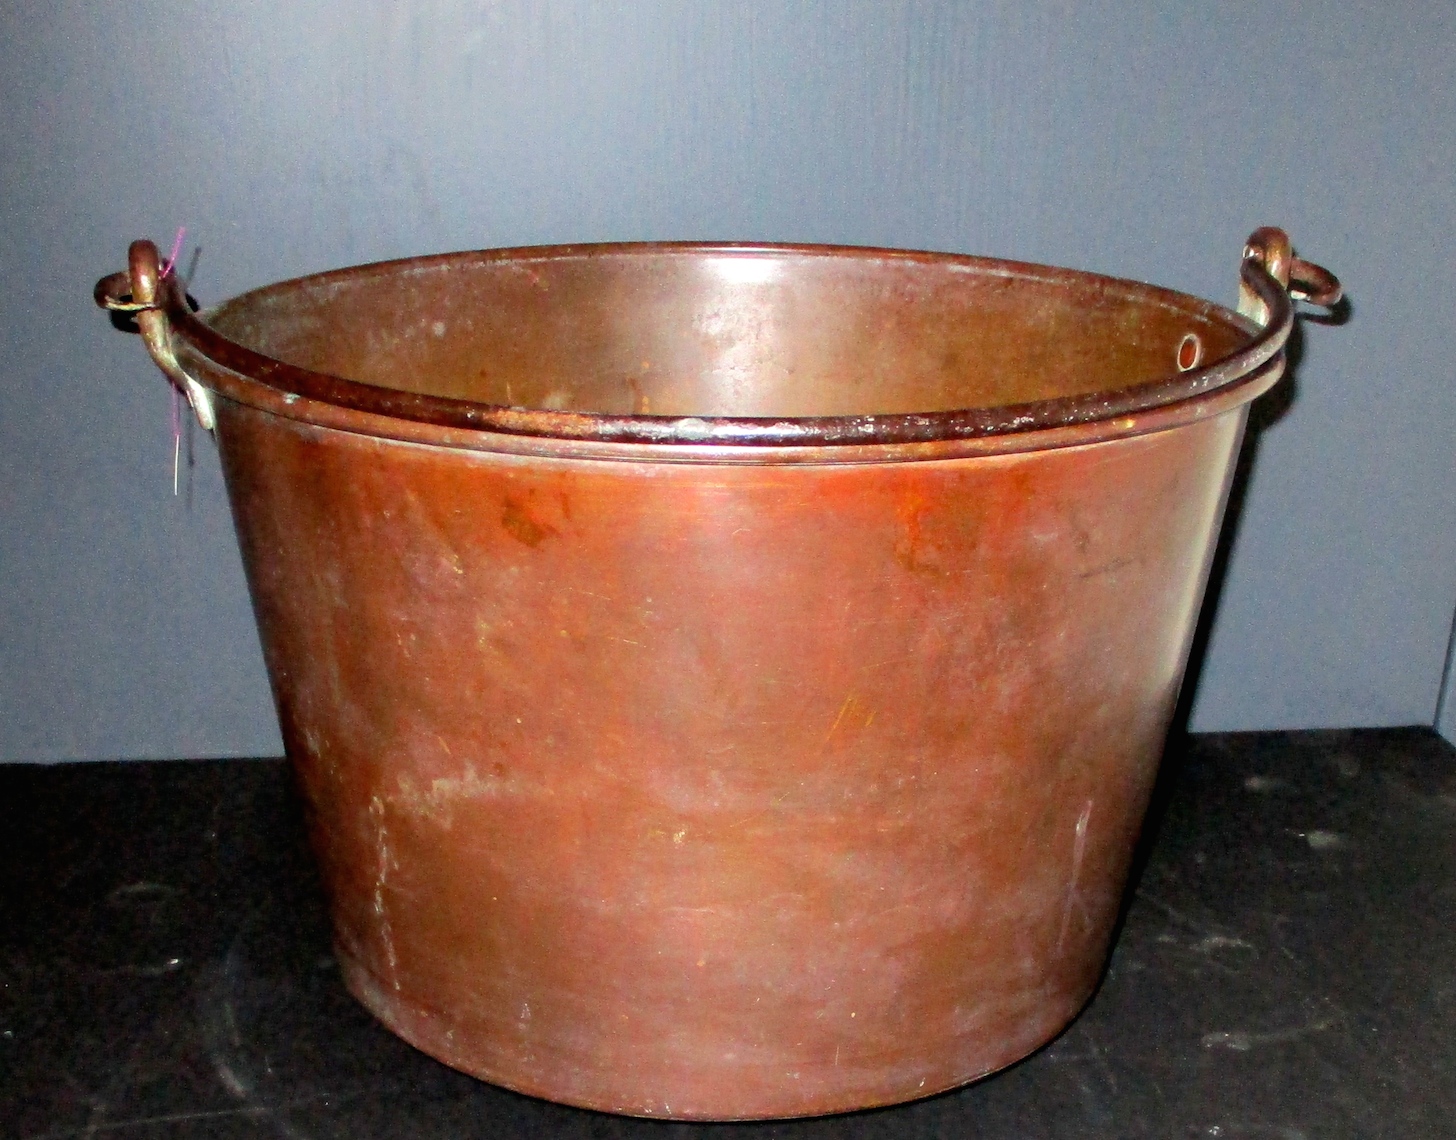 Copper Pail w/ Forged Iron Handle (14" D x 10" H)